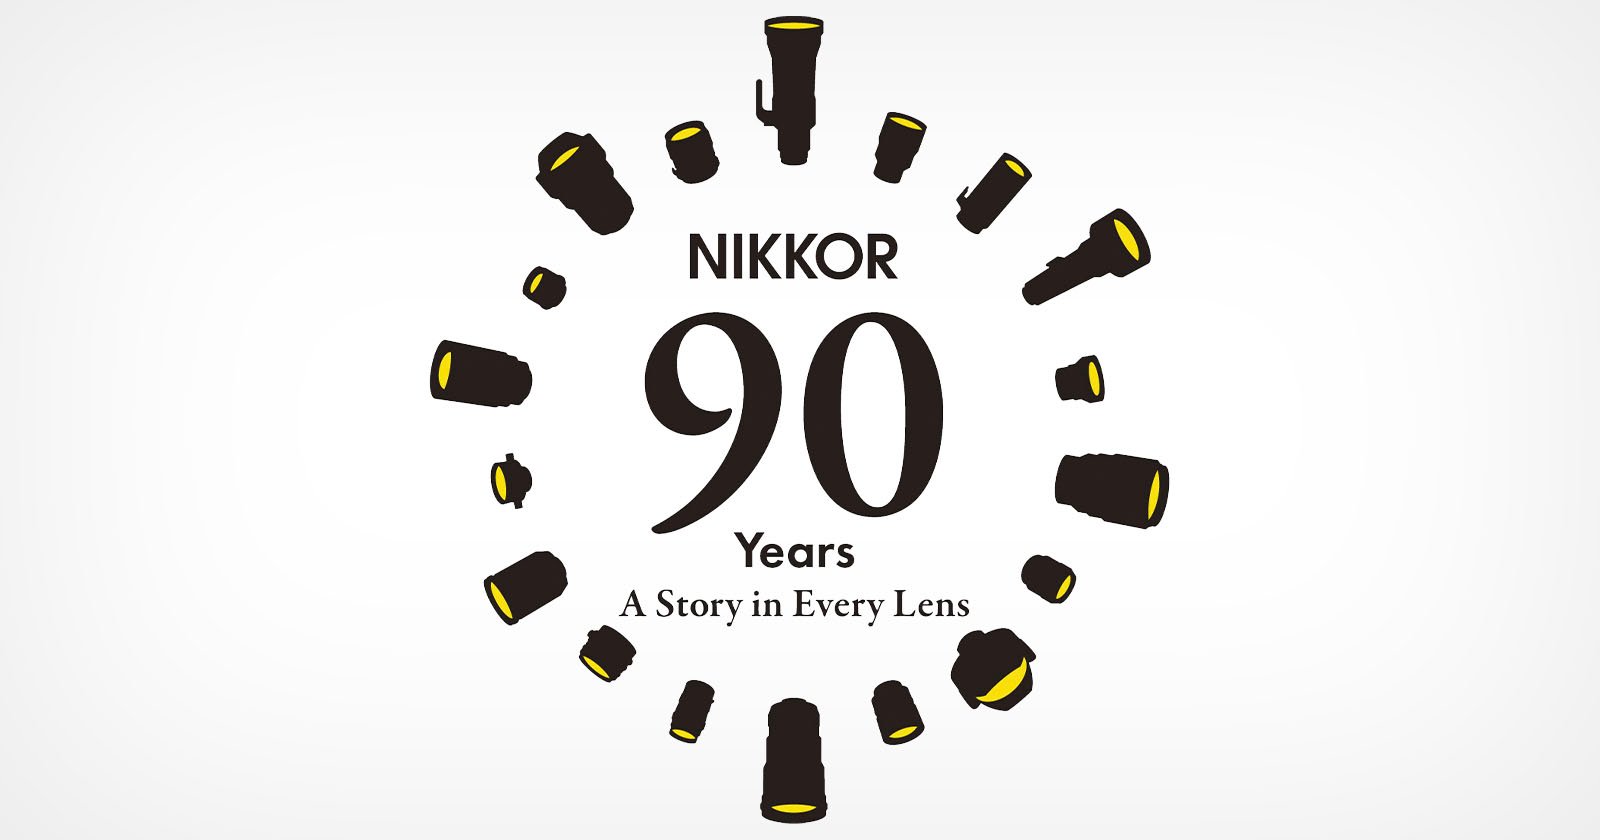 Nikon Celebrates 90 Years of Nikkor Optics: A Story in Every Lens